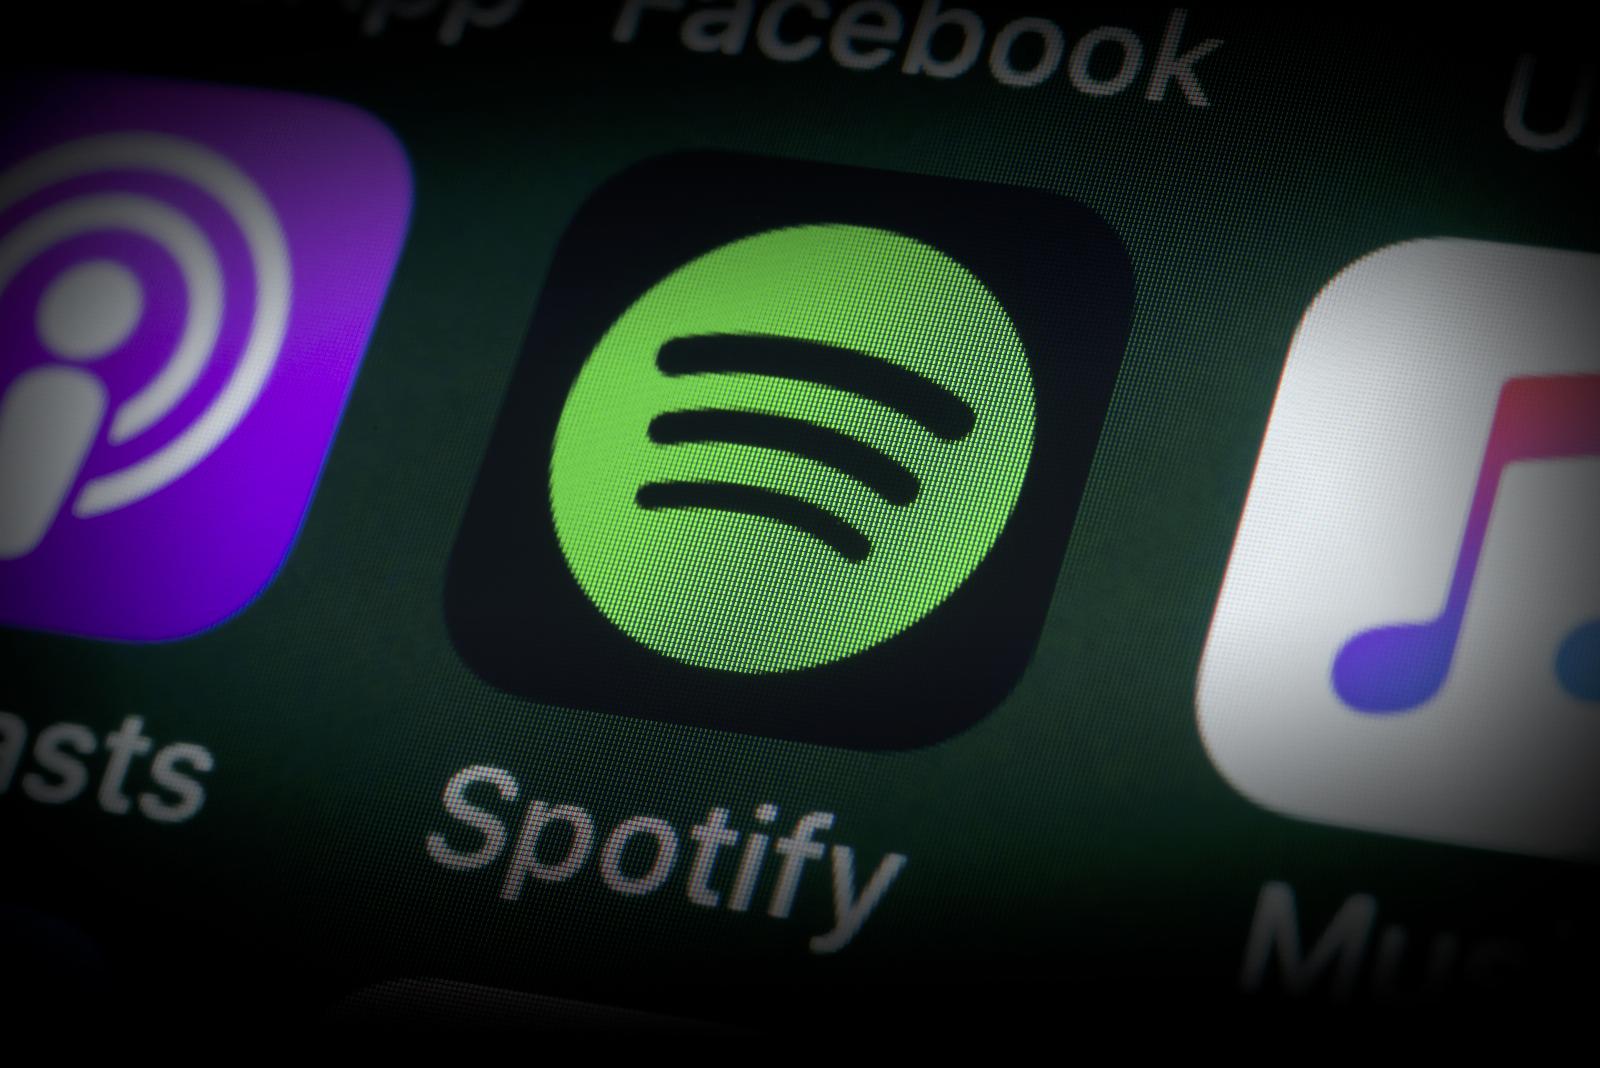 Spotify is testing new card-style user profiles focused on discovery